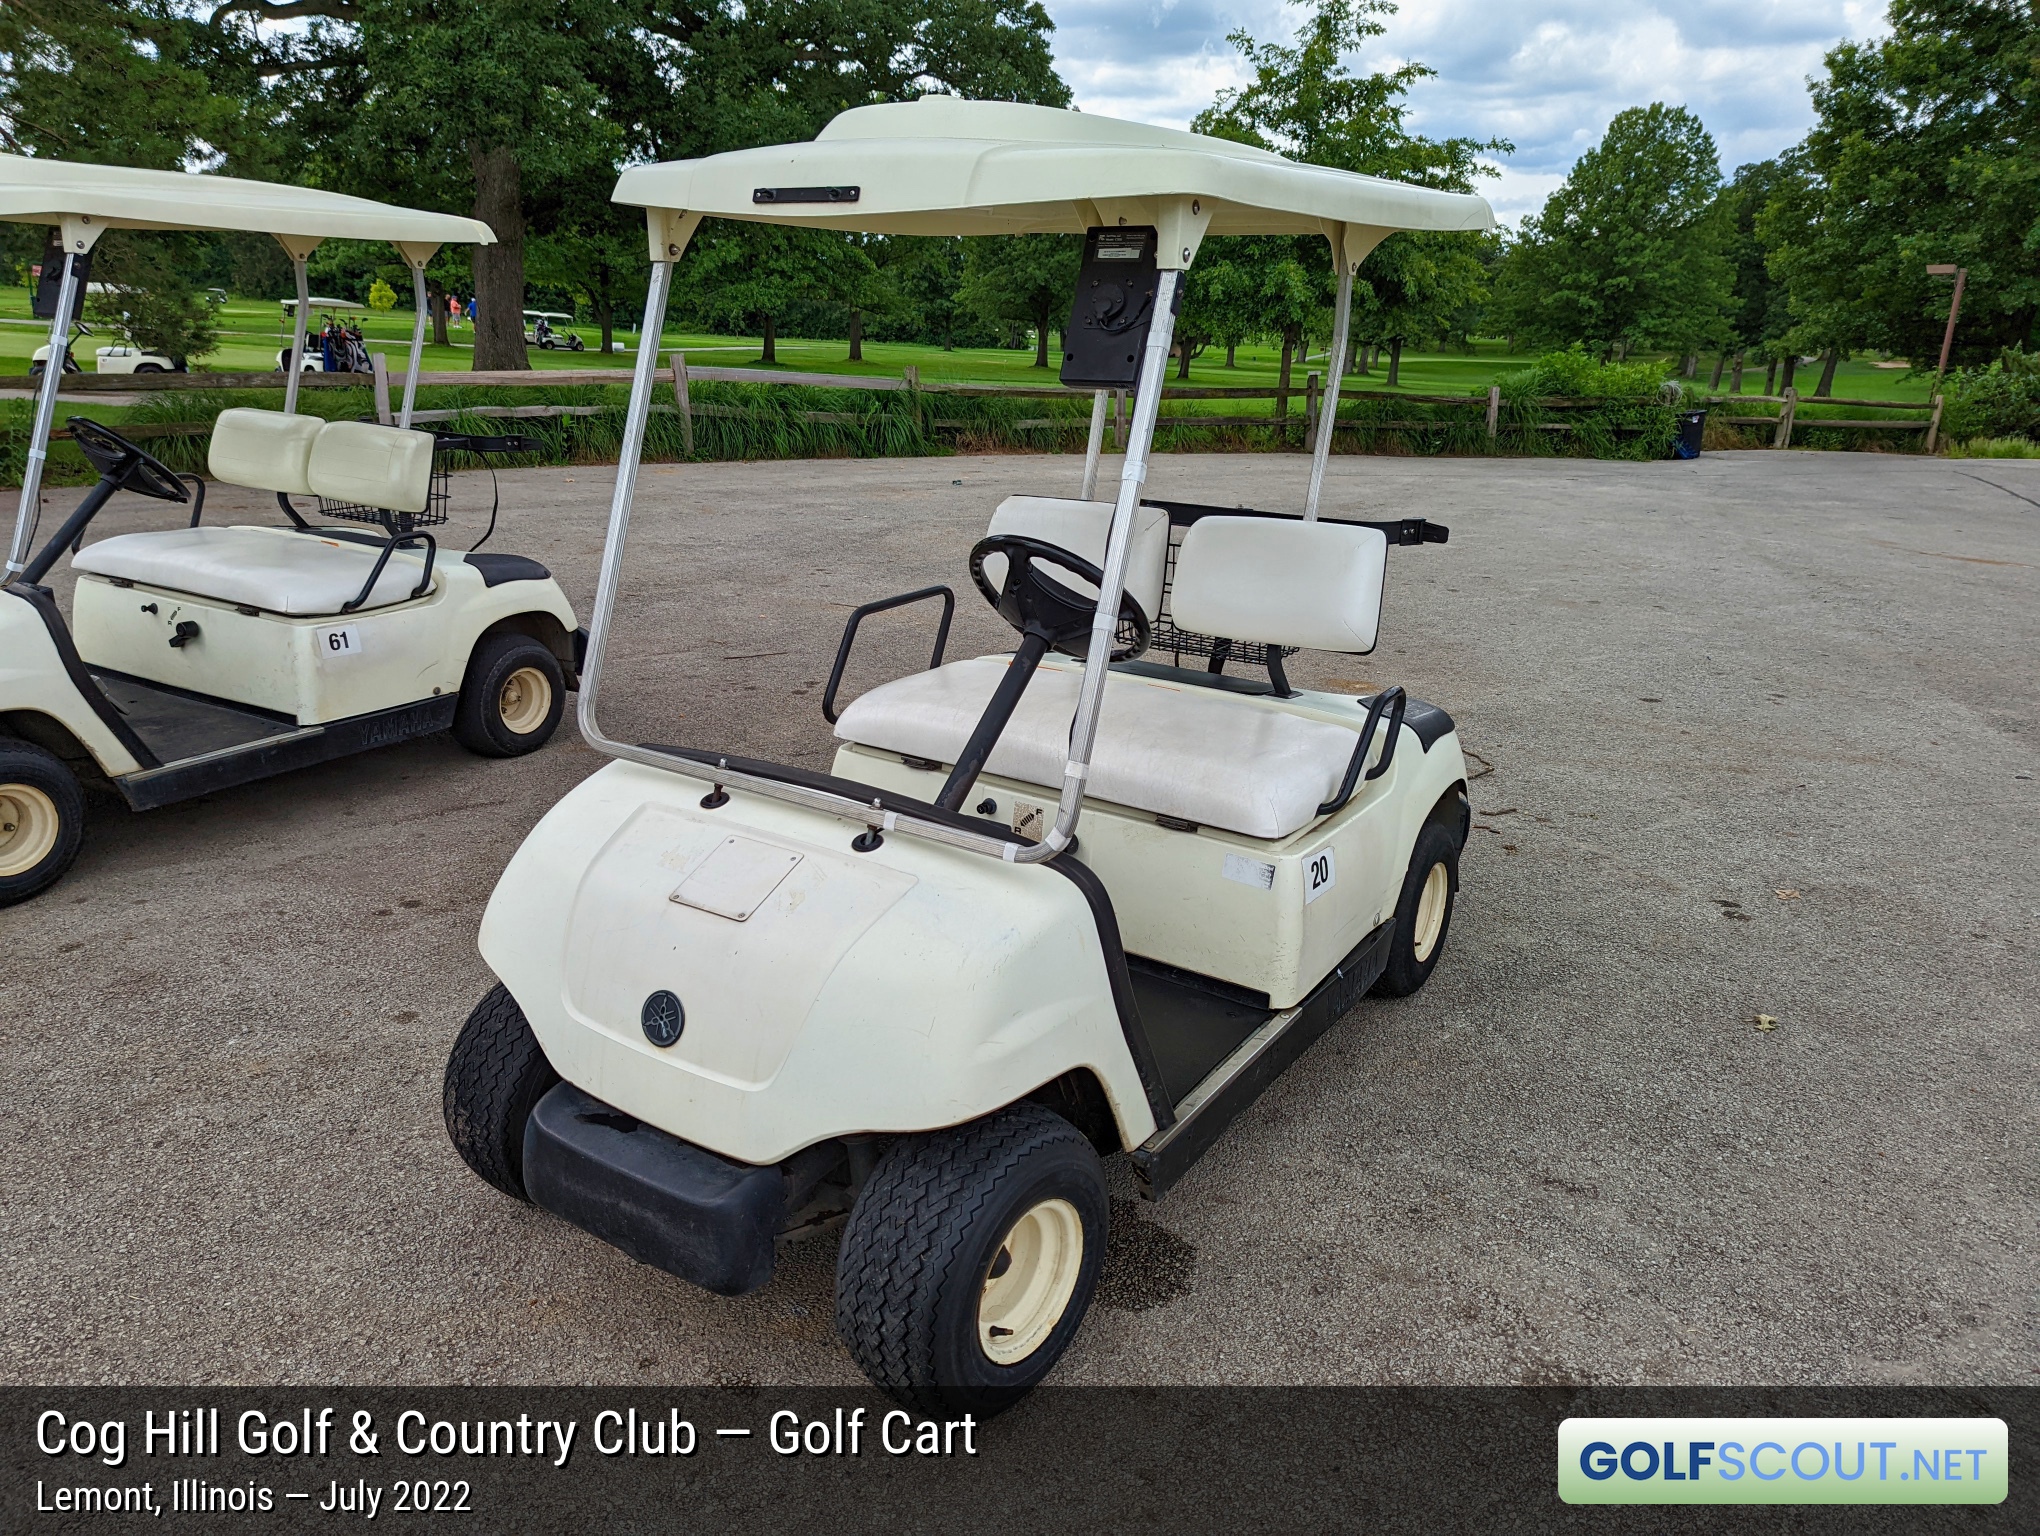 Photo of the golf carts at Cog Hill Course #3 in Lemont, Illinois. A golf cart at Cog Hill, from the front. It looks a little dated.